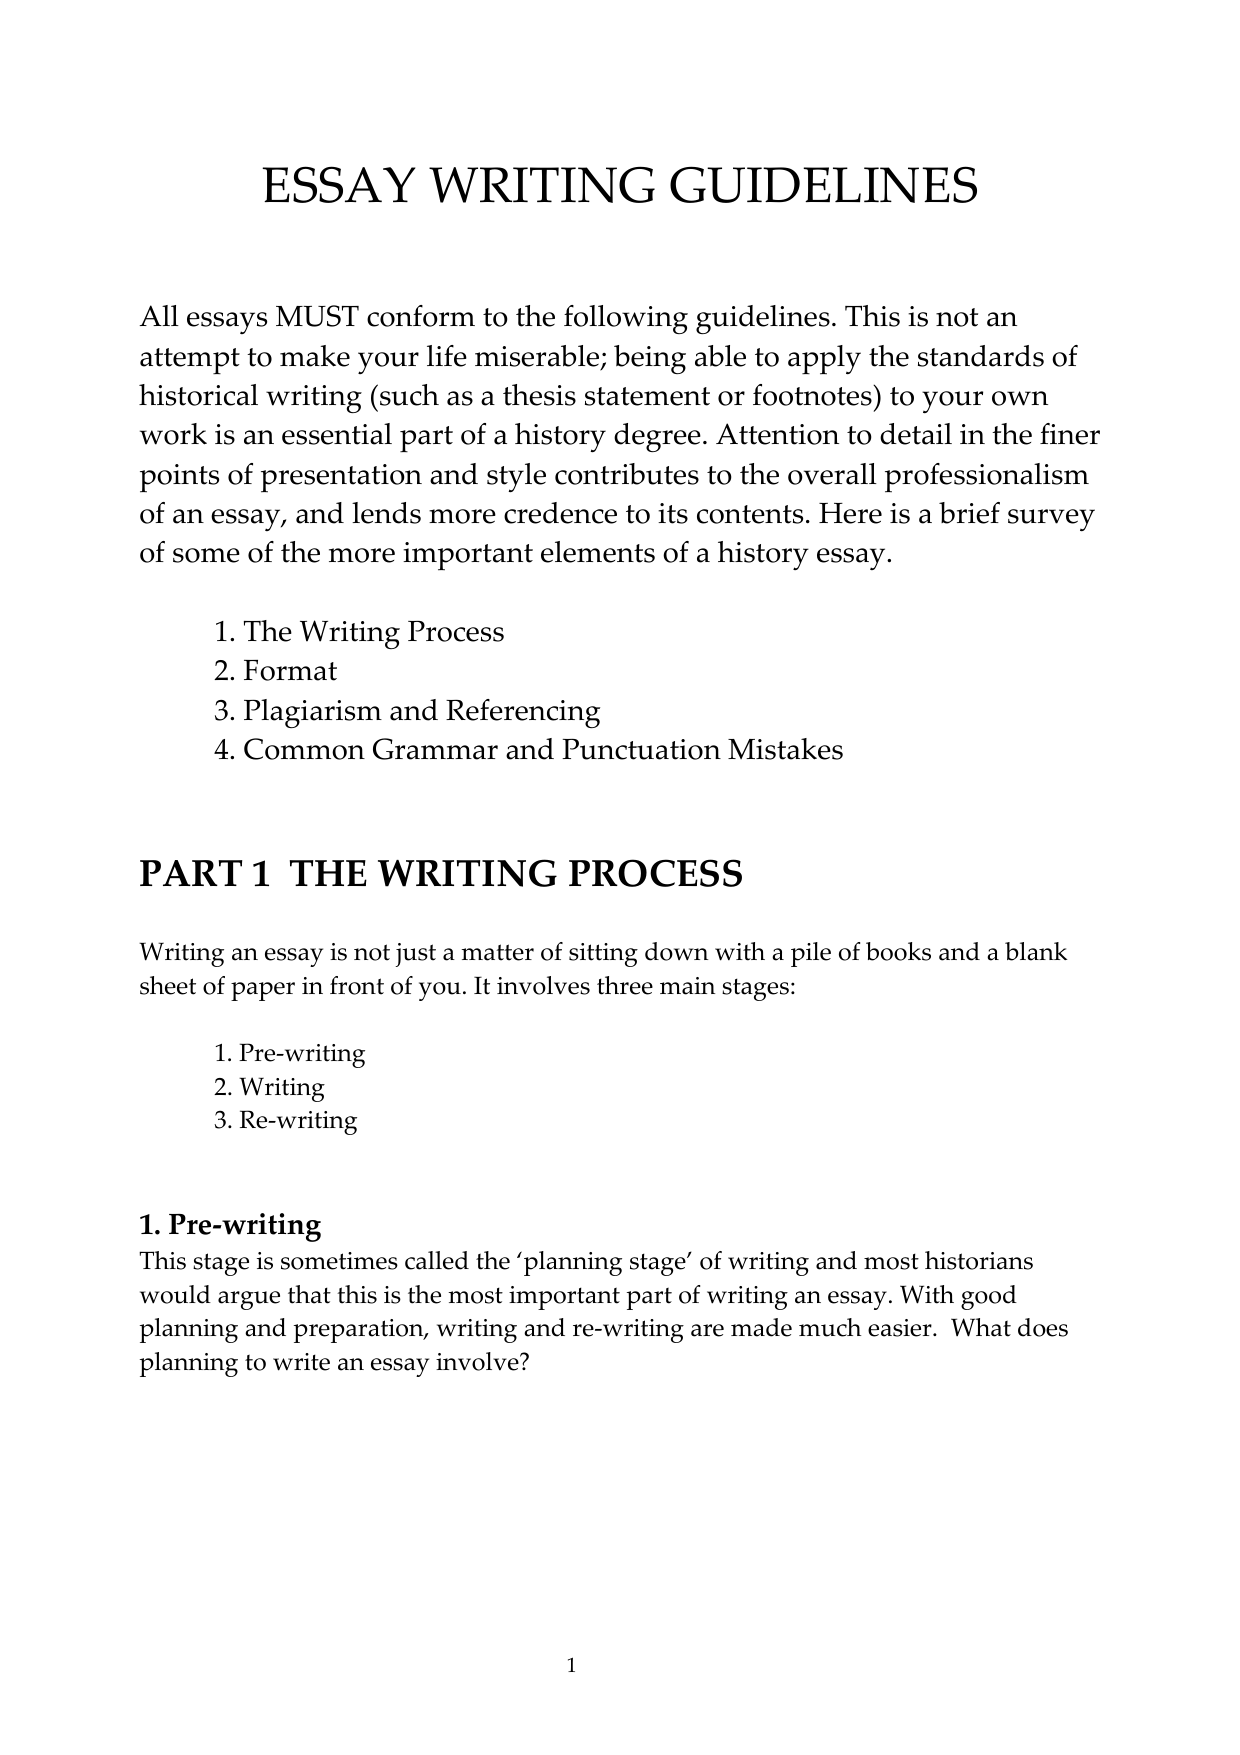 guide to writing a basic essay